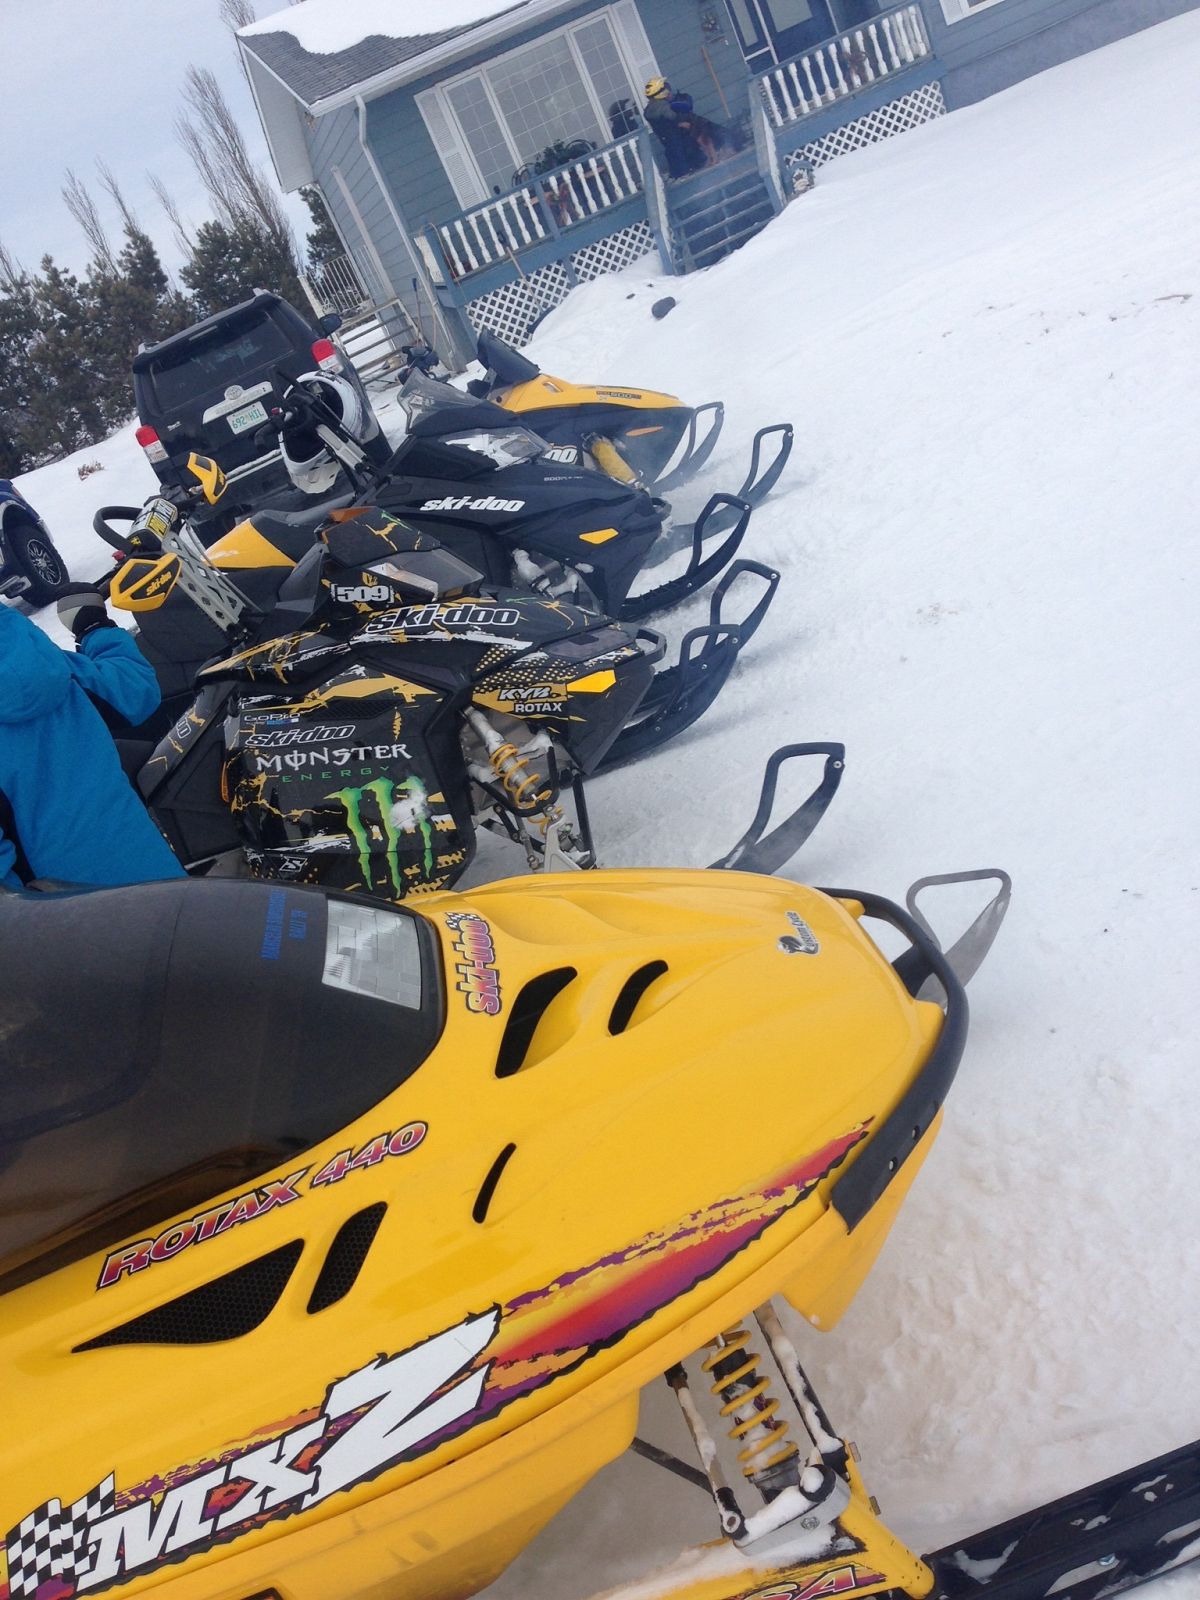 Family day of skidooing